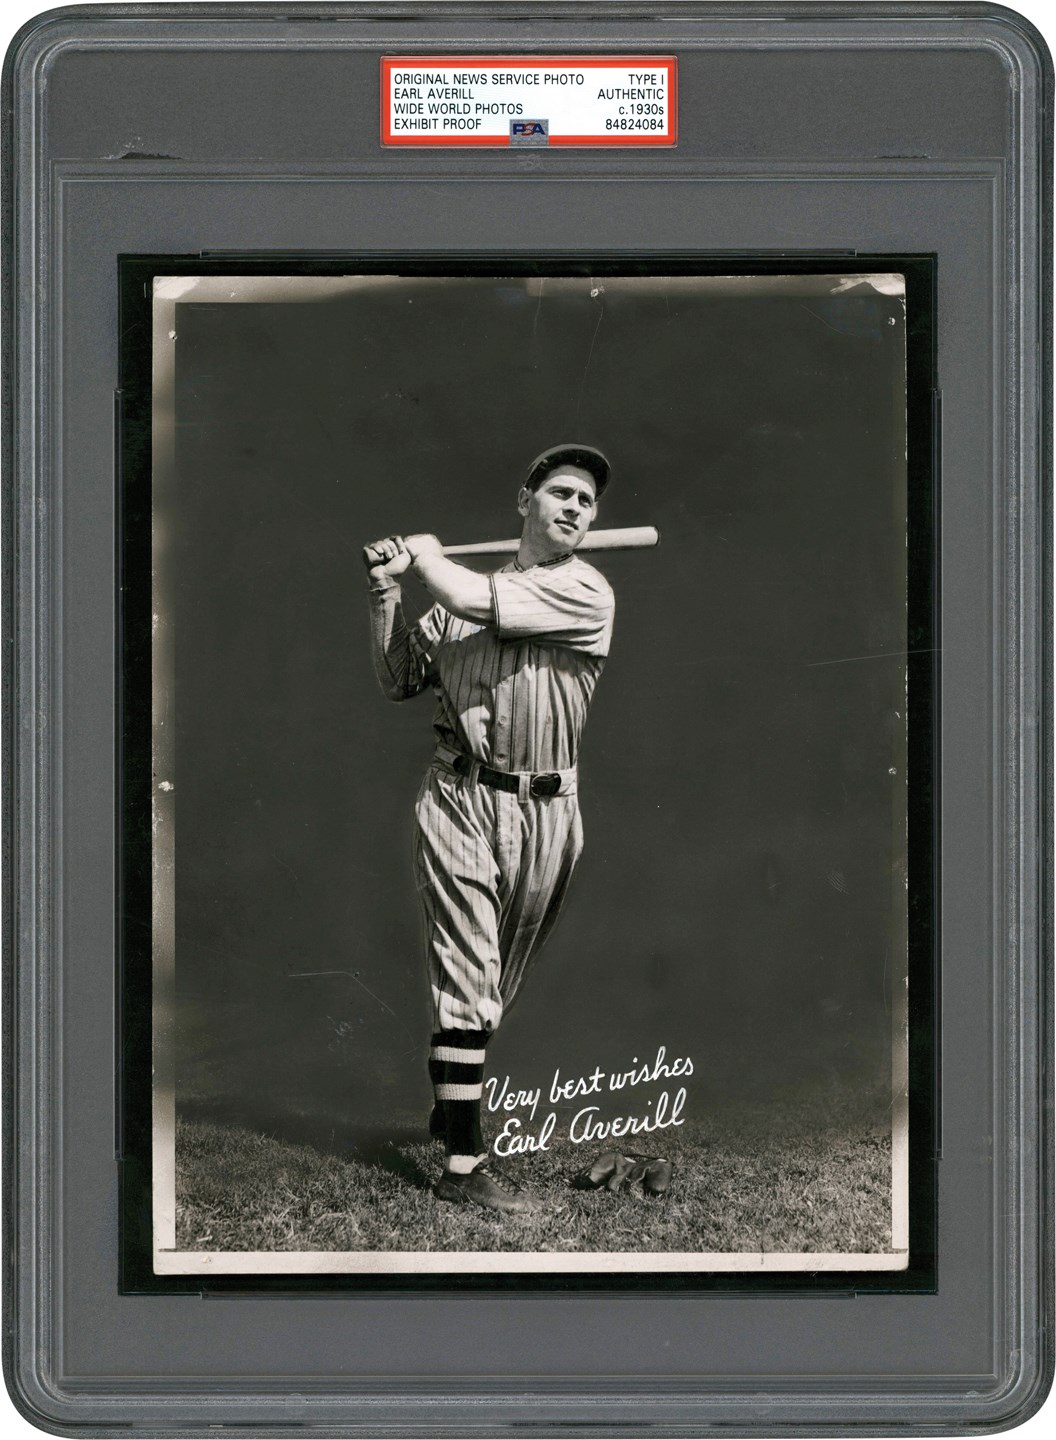 Vintage Sports Photographs - Original Earl Averill Photograph Used to Produce His 1939 Salutations Exhibit Card (PSA Type I)